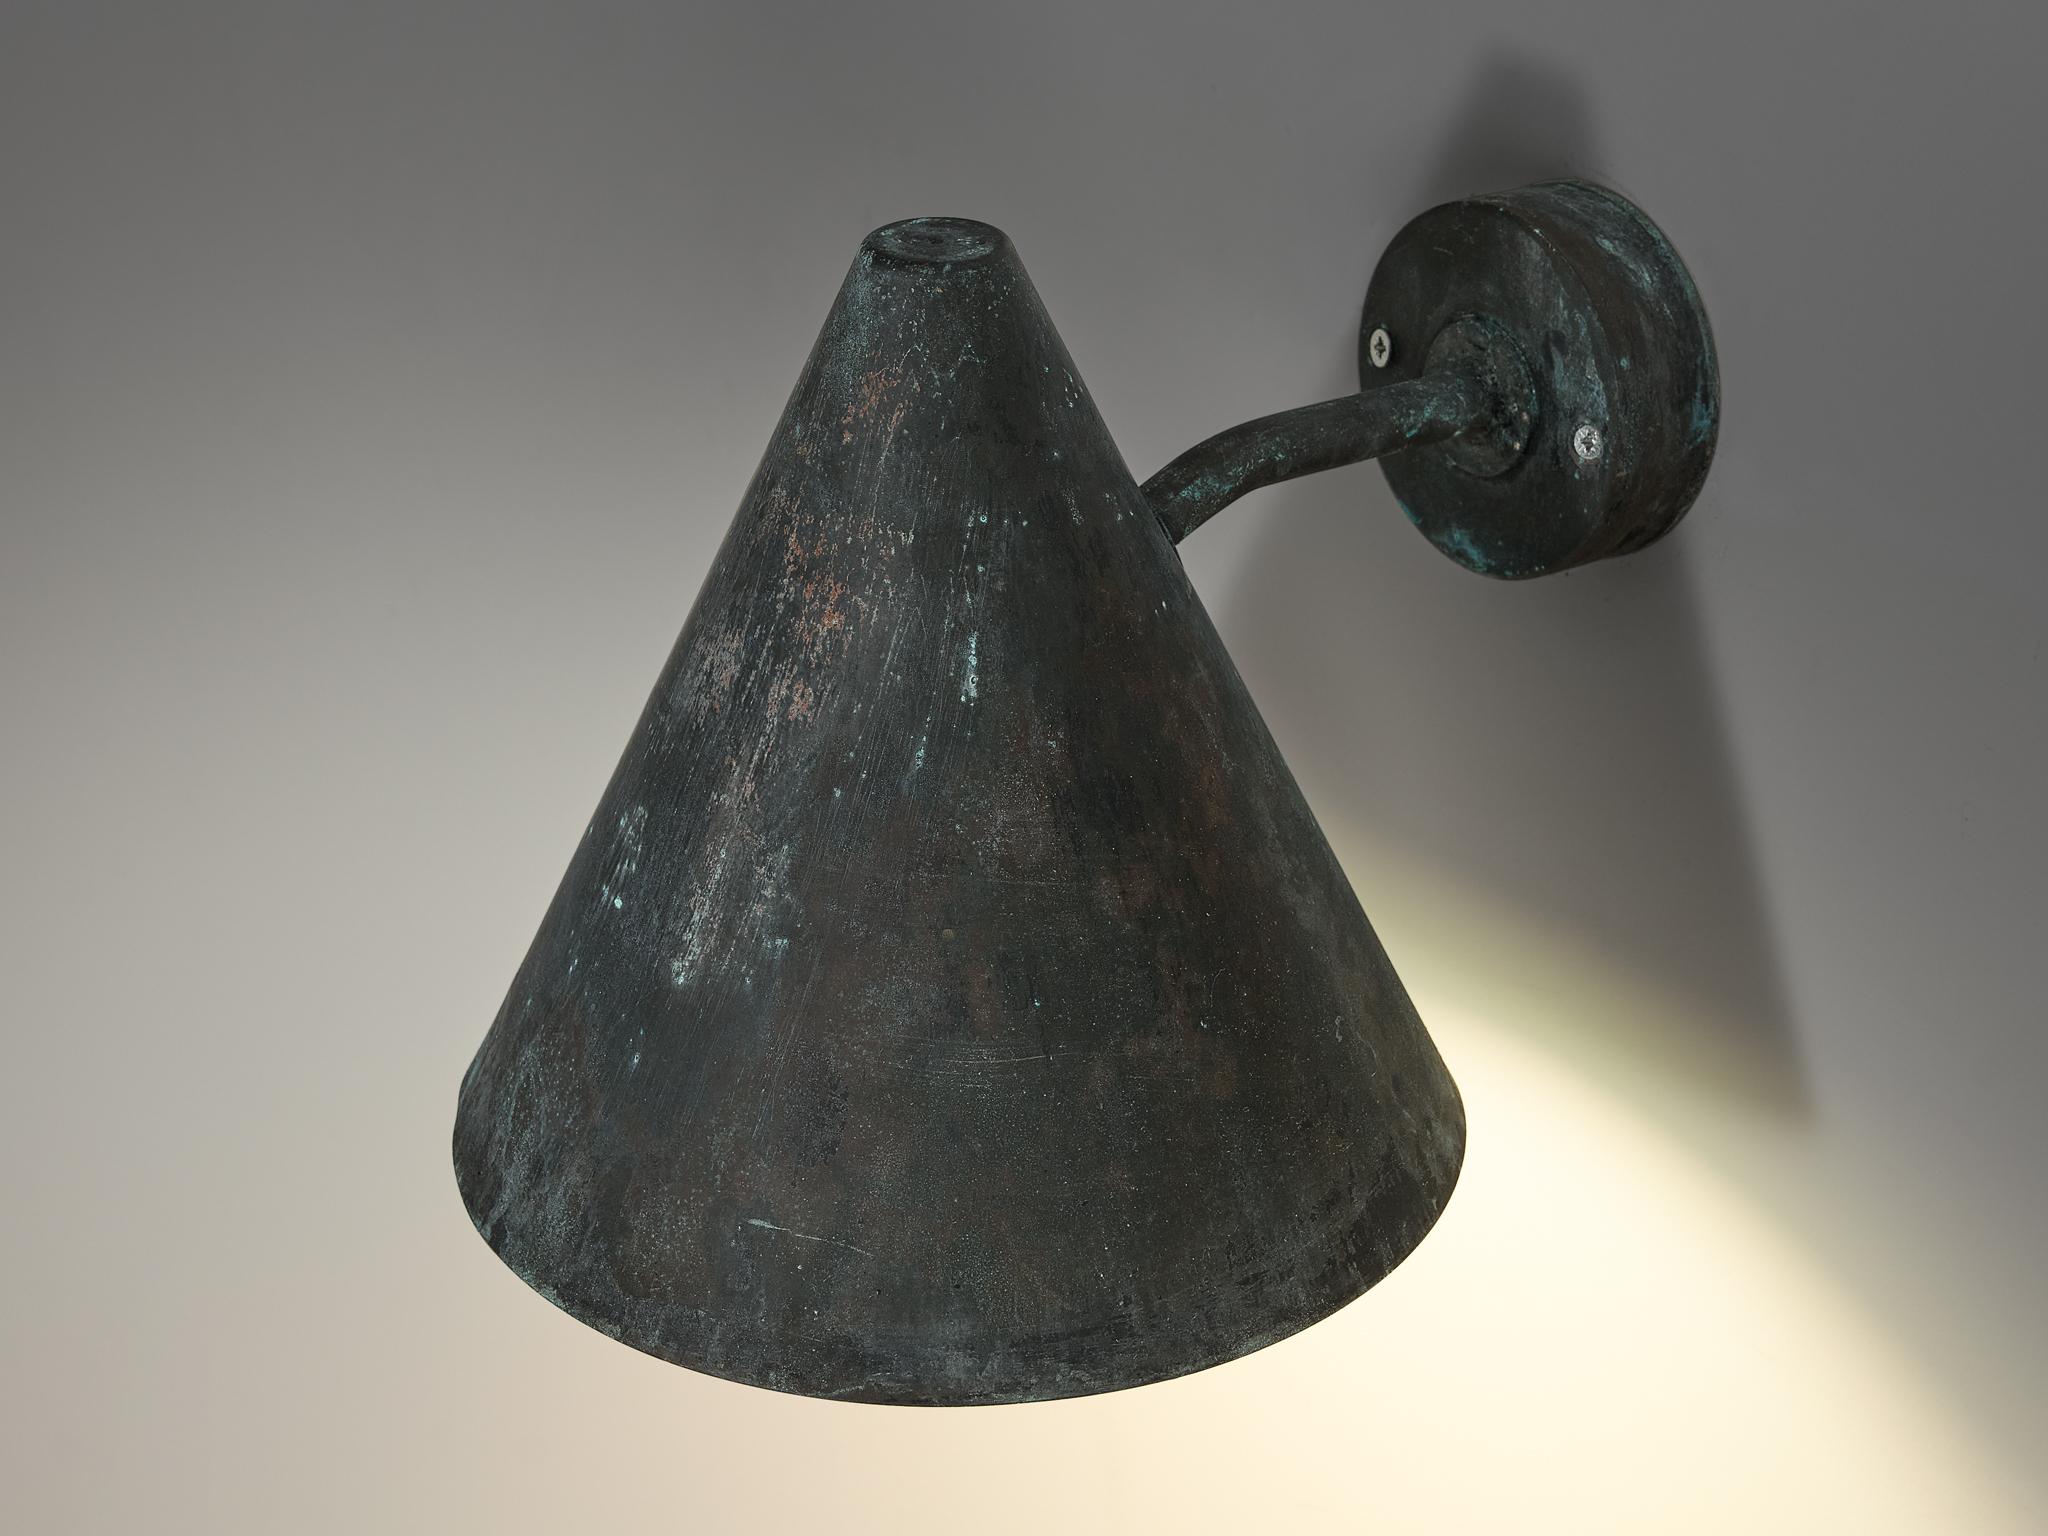  Hans-Agne Jakobsson 'Tratten' Wall Lights in Patinated Copper  1